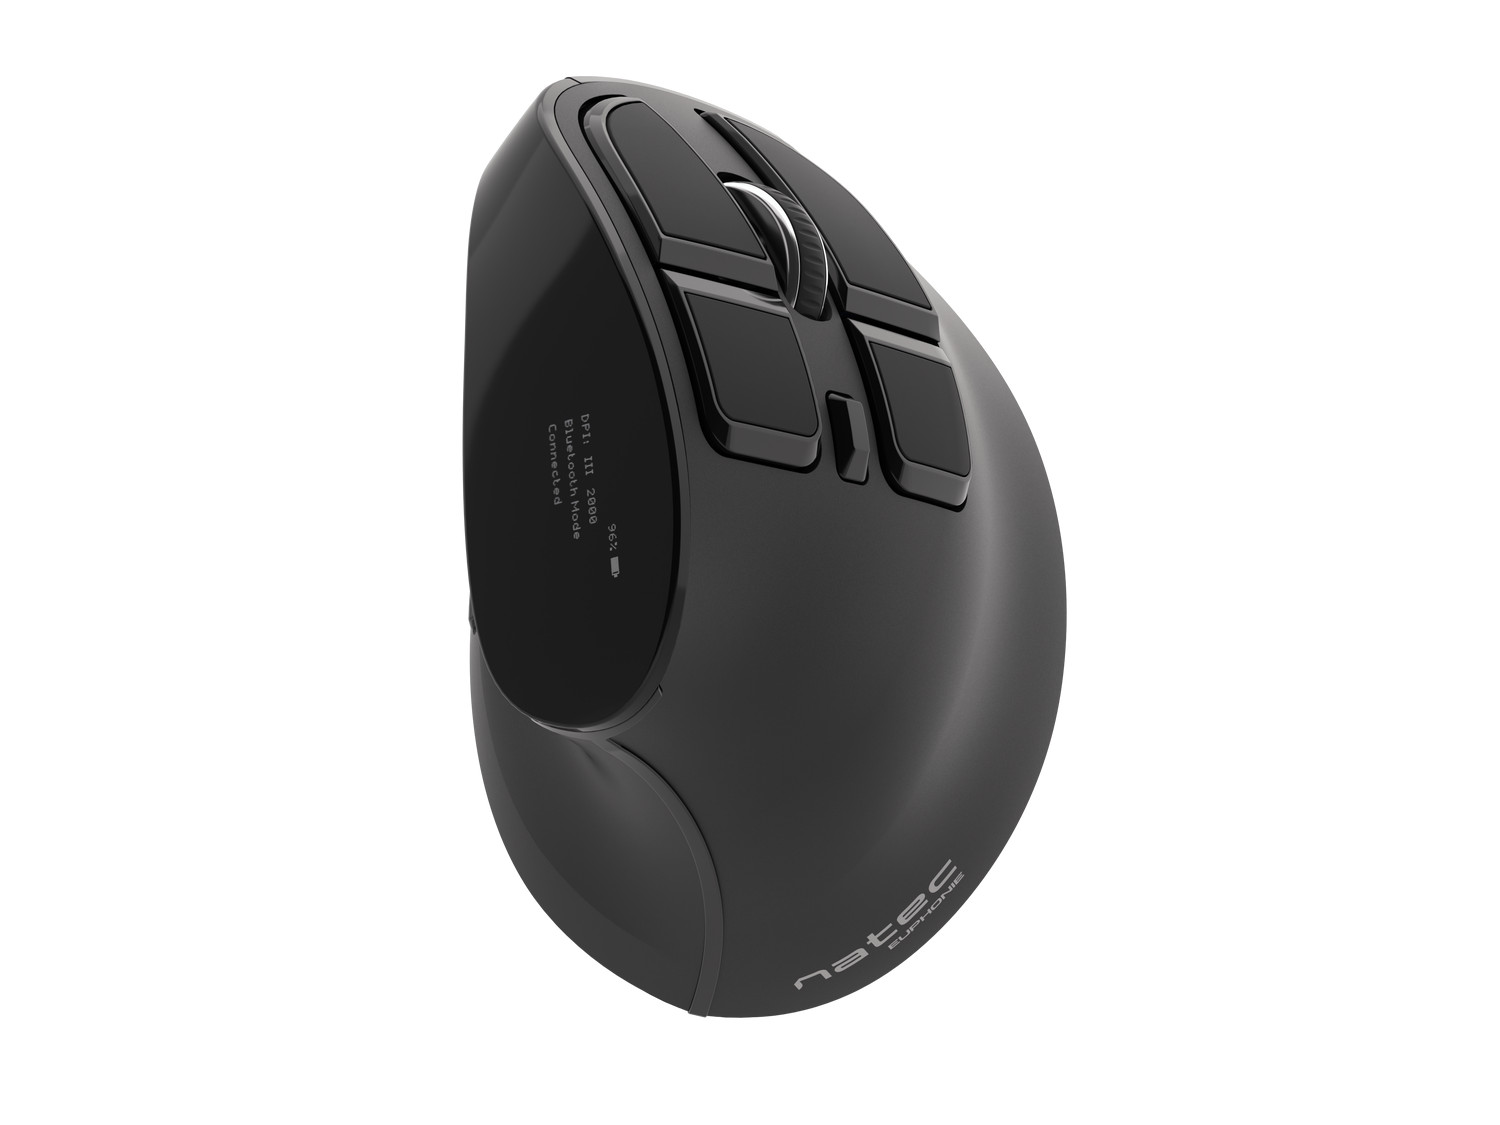 Natec mouse Euphonie vertical wireless, 2400 DPI black bluetooth NMY-1601